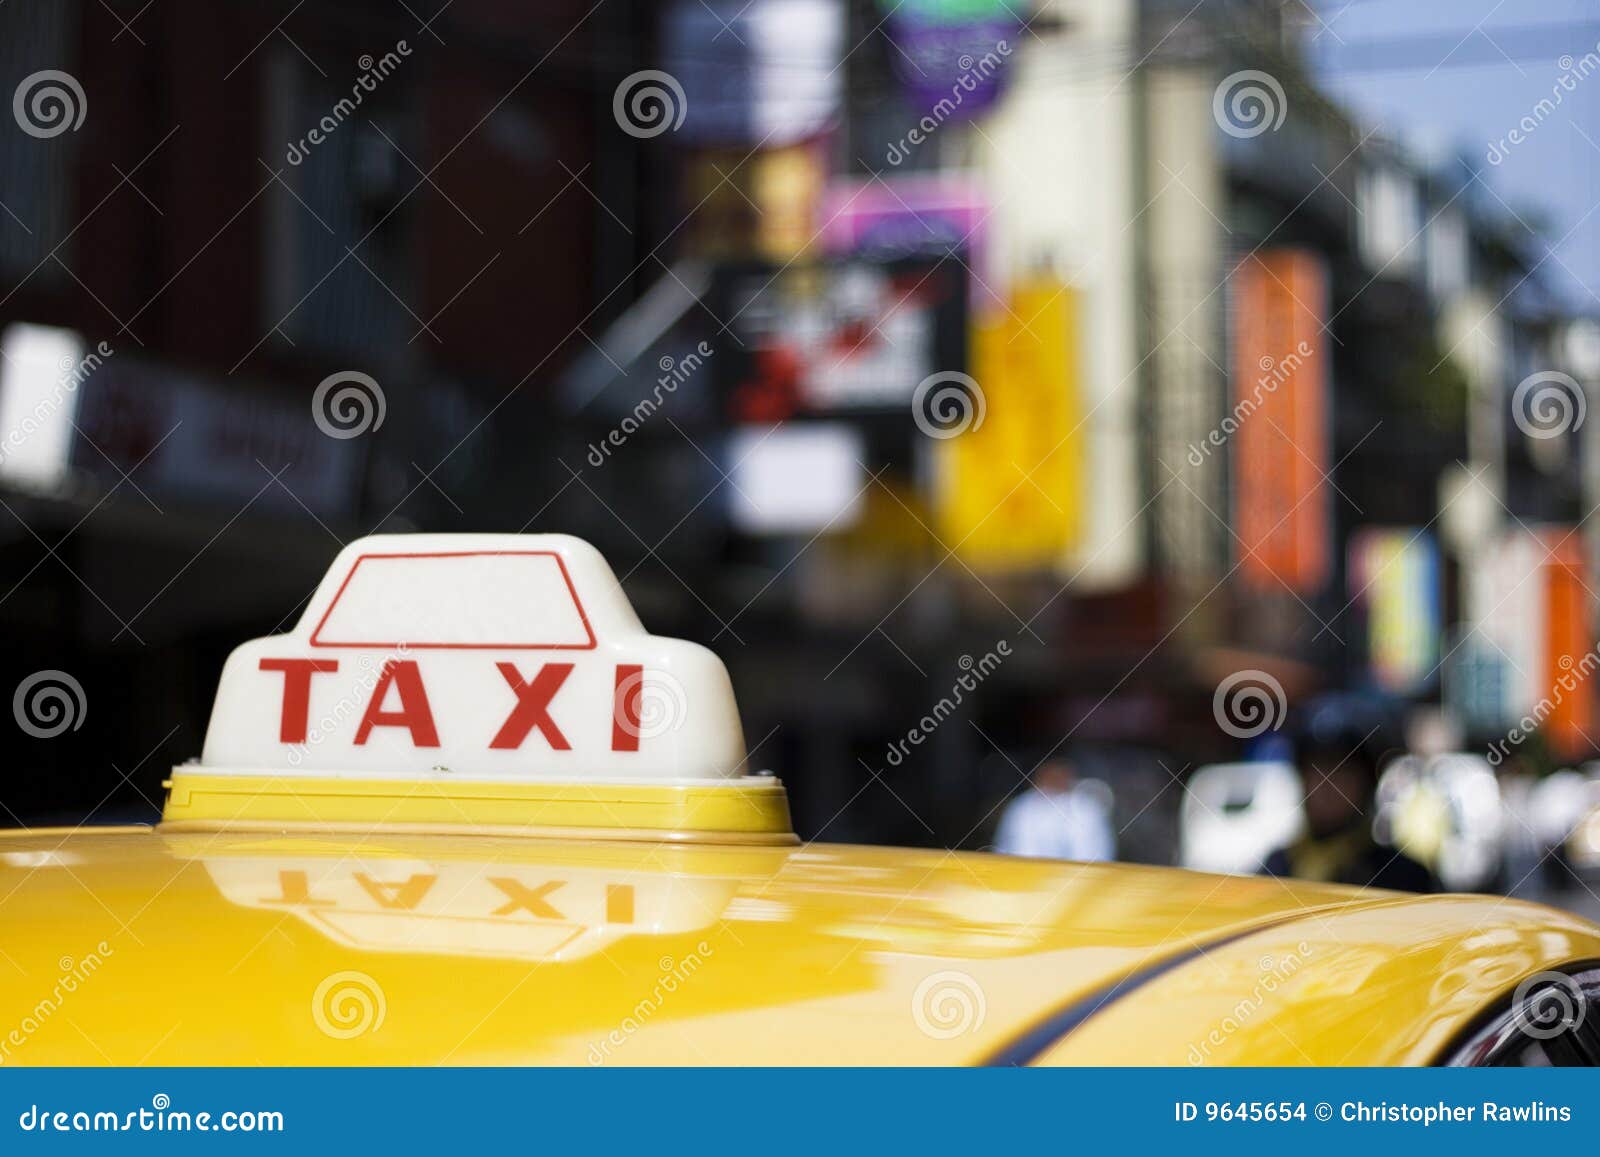 4,866 Taxi Signs Photos - Free & Royalty-Free Stock Photos from 